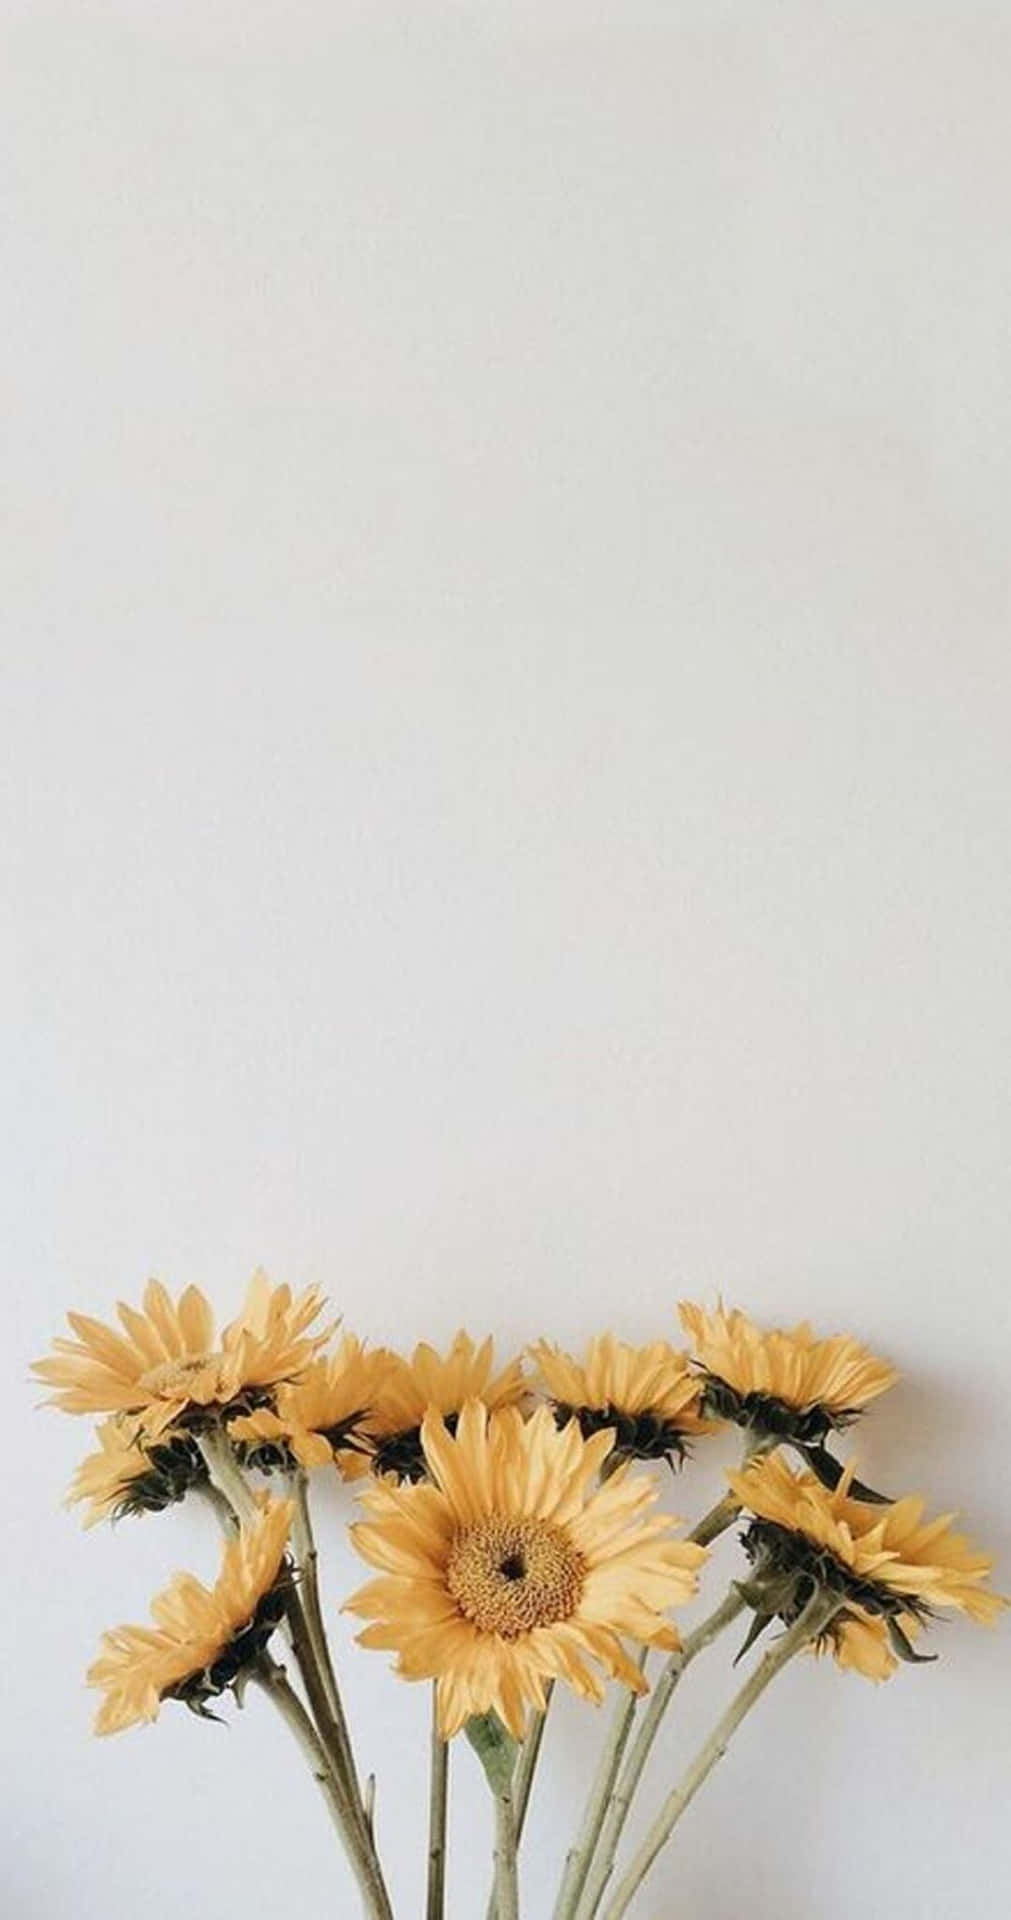 A Vase Of Yellow Sunflowers Sitting On A White Table